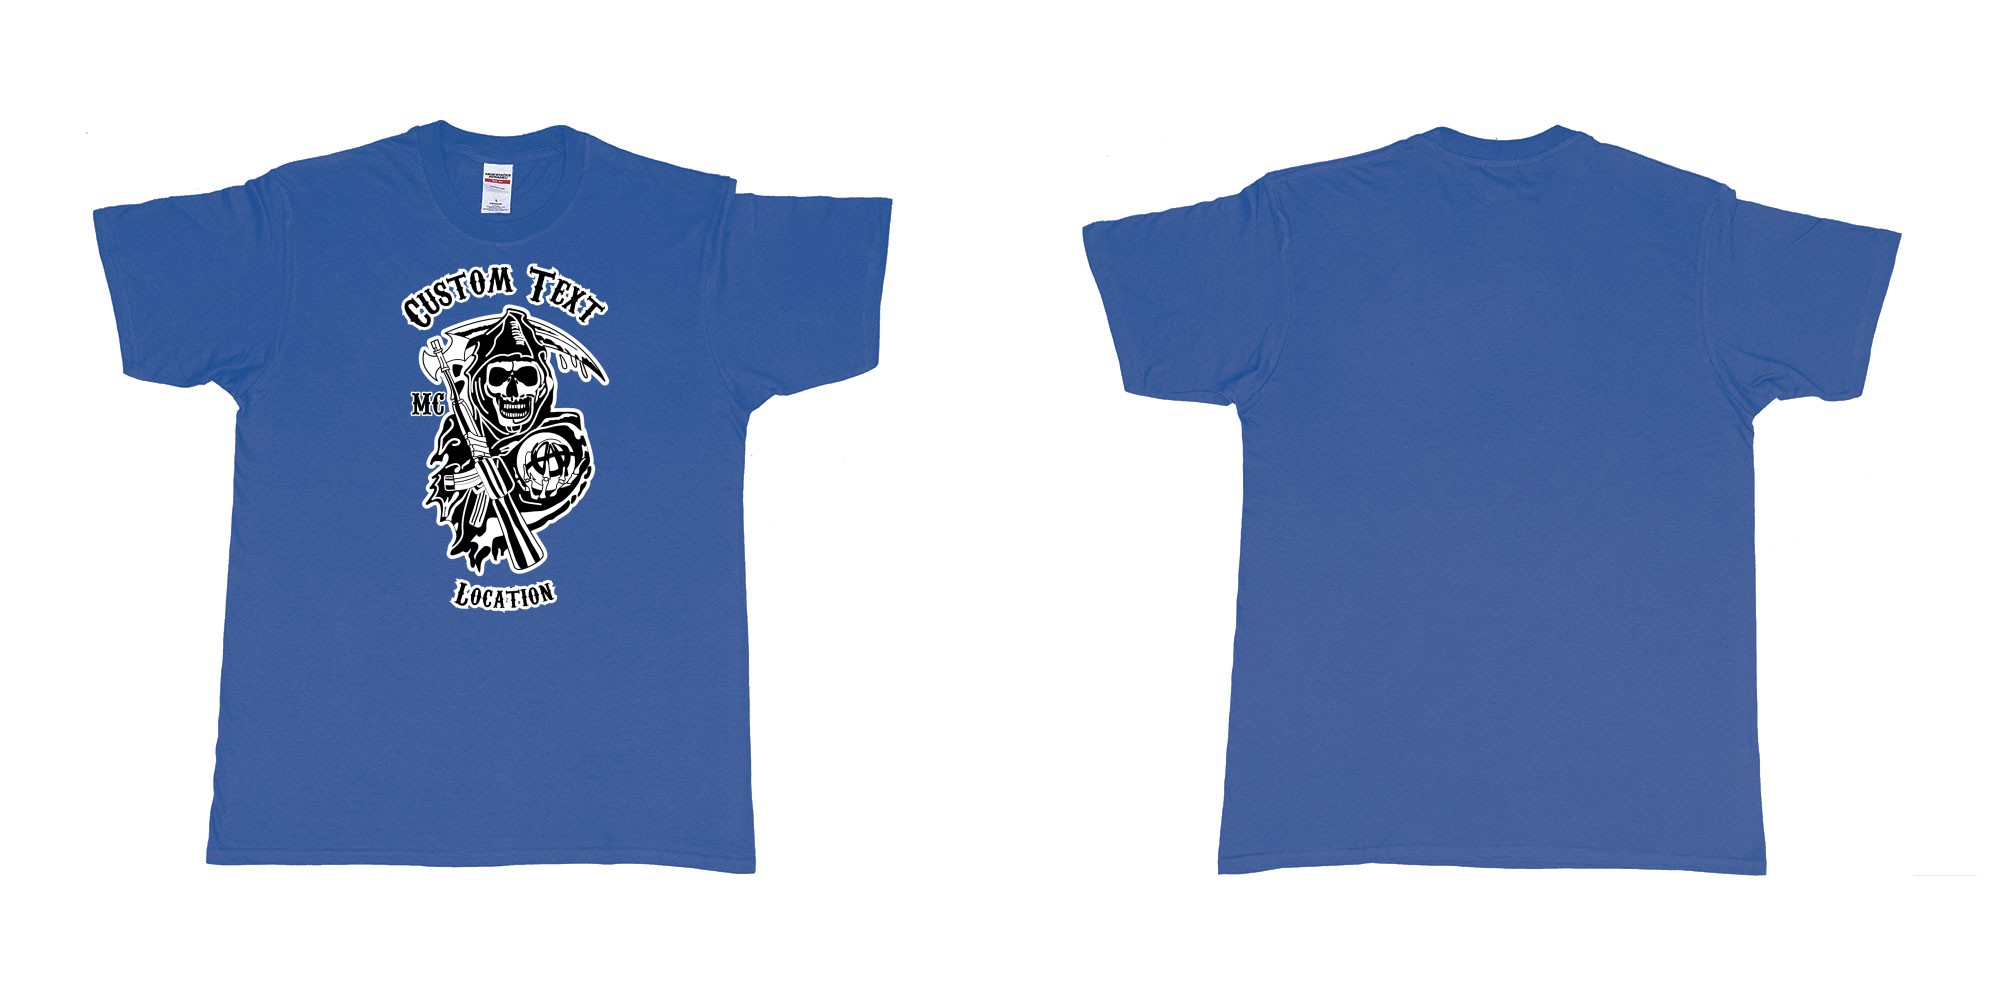 Custom tshirt design son of anarchy logo custom text in fabric color royal-blue choice your own text made in Bali by The Pirate Way